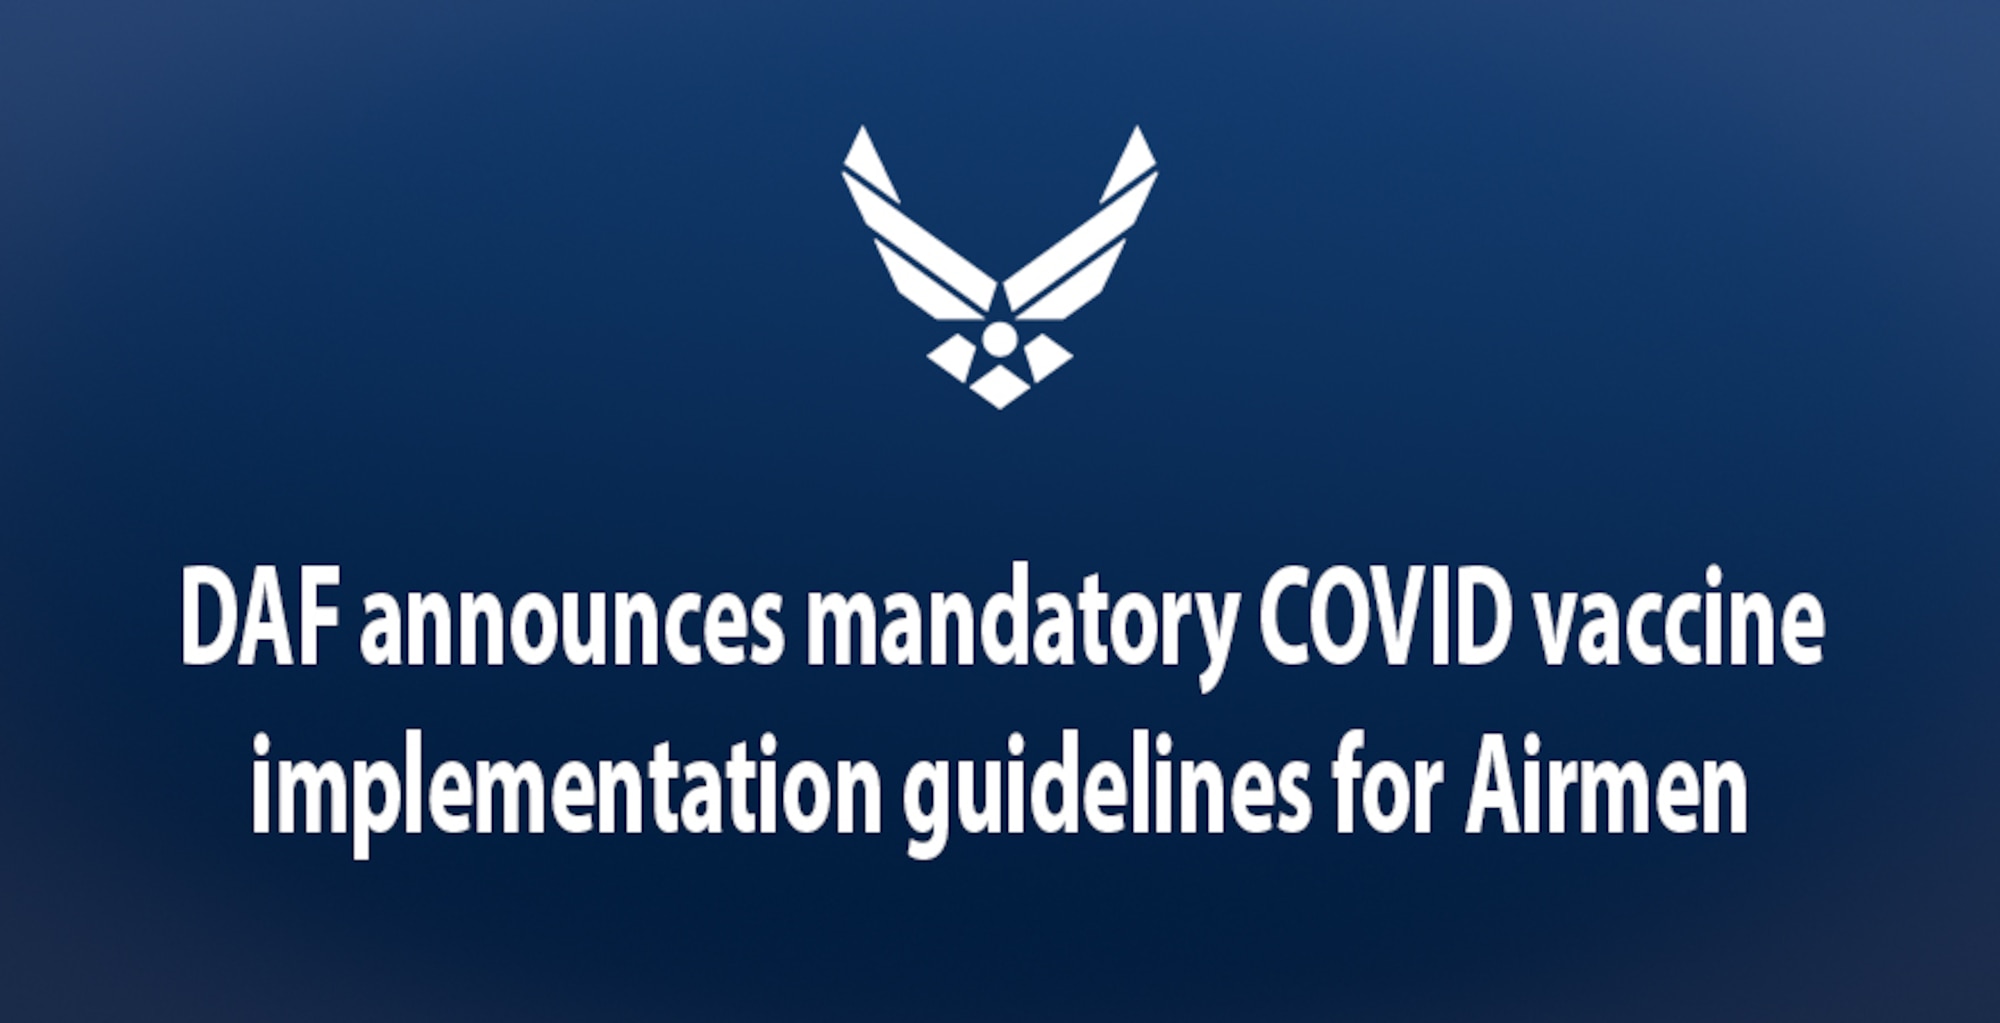 DAF announces mandatory COVID vaccine implementation guidelines for Airmen